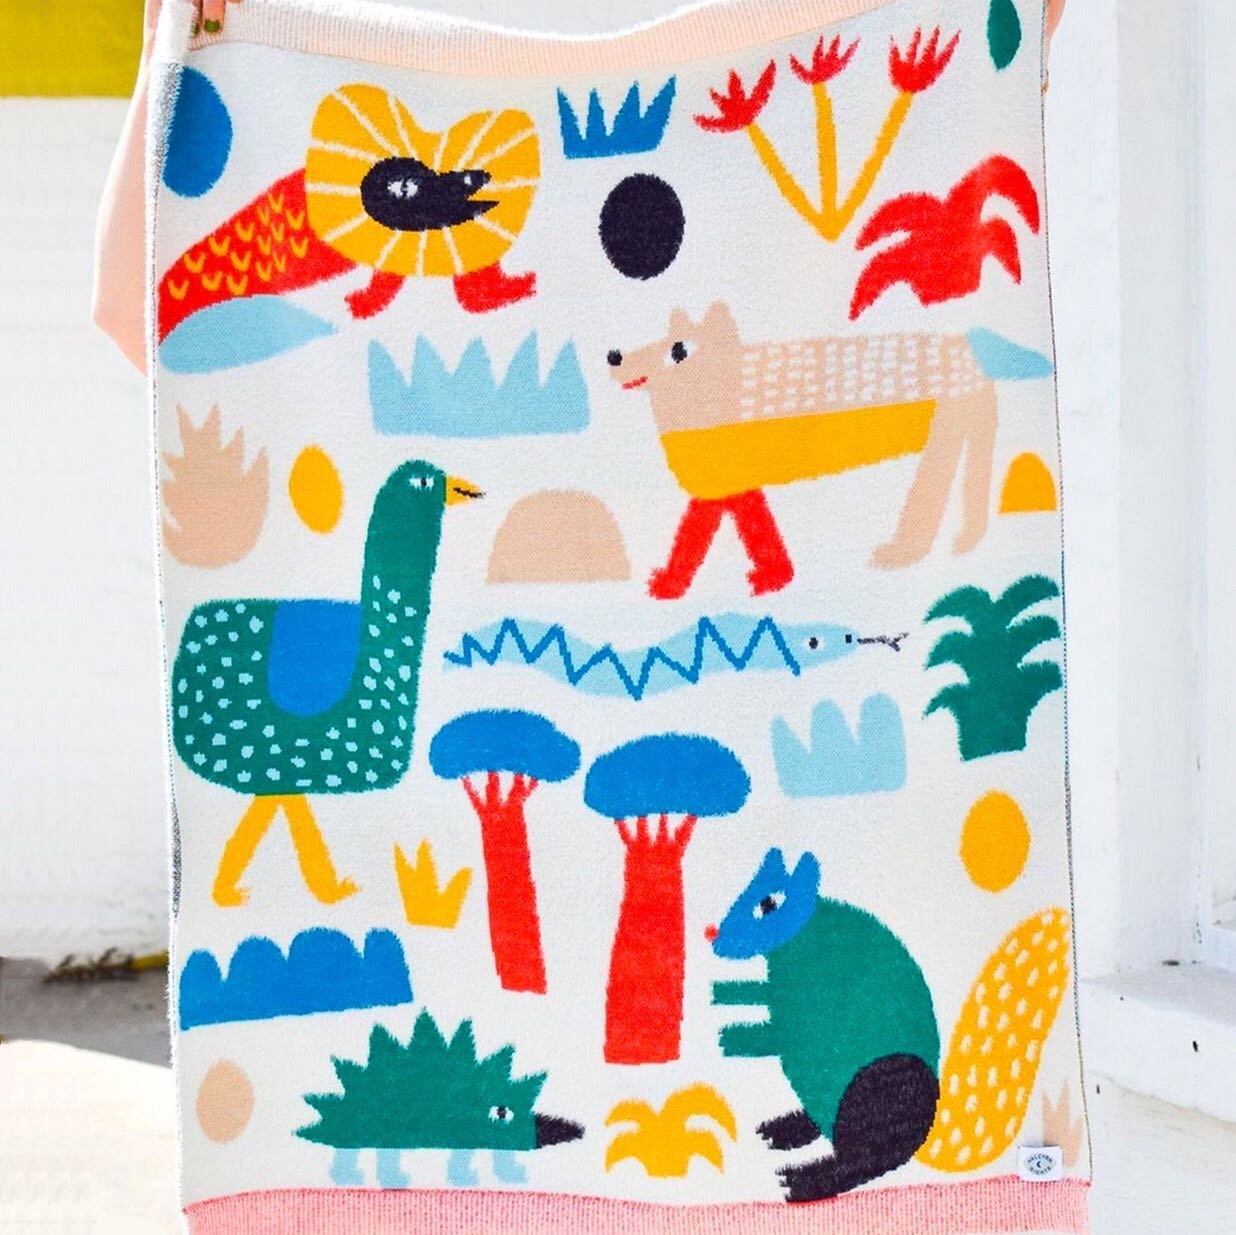 ✨Not-too-far-back throwback Monday✨ @halcyon_nights_ blanket collab! Pic taken by stockist @pinkys_store_melbourne 📸💕
.
.
.
#illustration #design #interiordesign #blanket #nursery